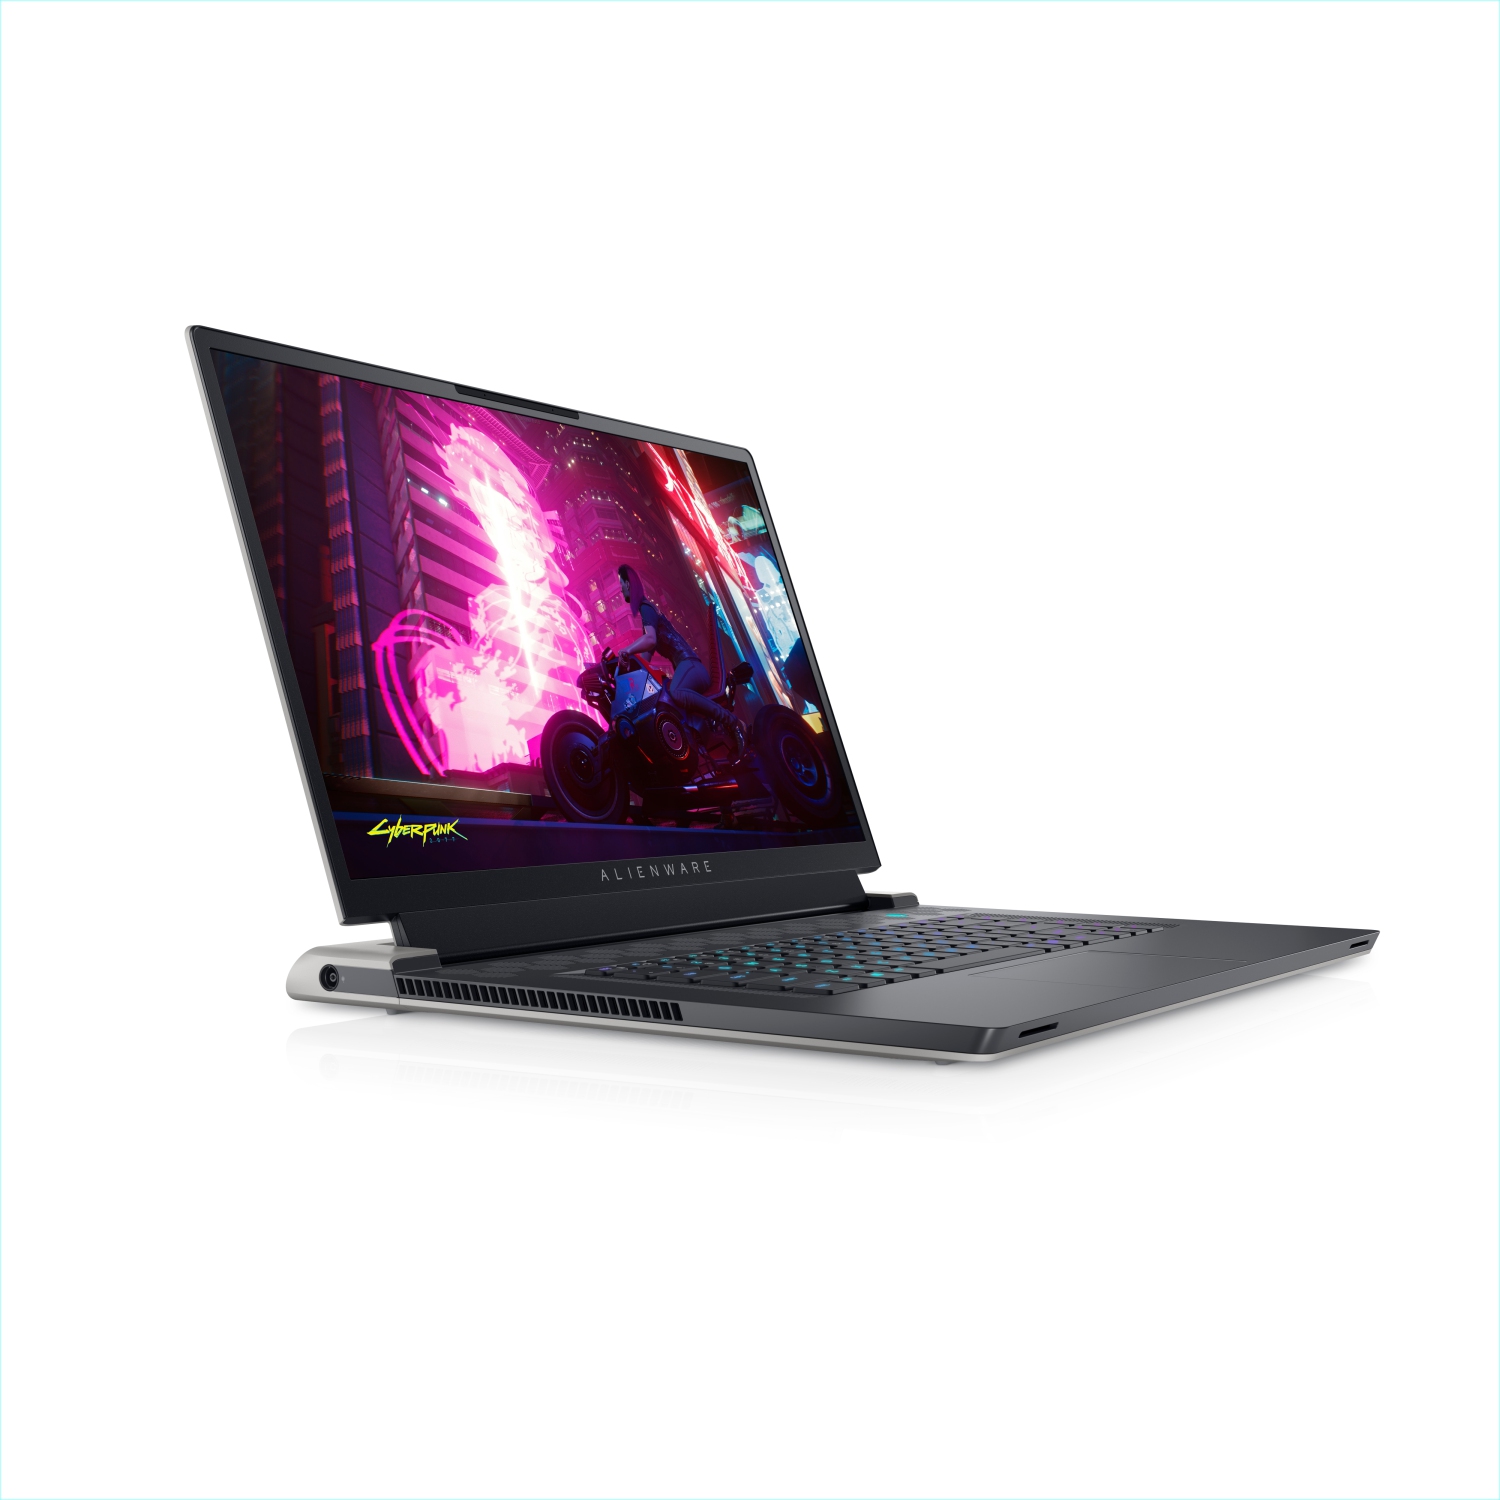 Refurbished (Excellent) - Dell Alienware X17 R1 Gaming Laptop (2021), 17.3" 4K, Core i9, 1TB SSD, 32GB RAM, RTX 3080, 8 Cores @ 5 GHz, 11th Gen CPU Certified Refurbished